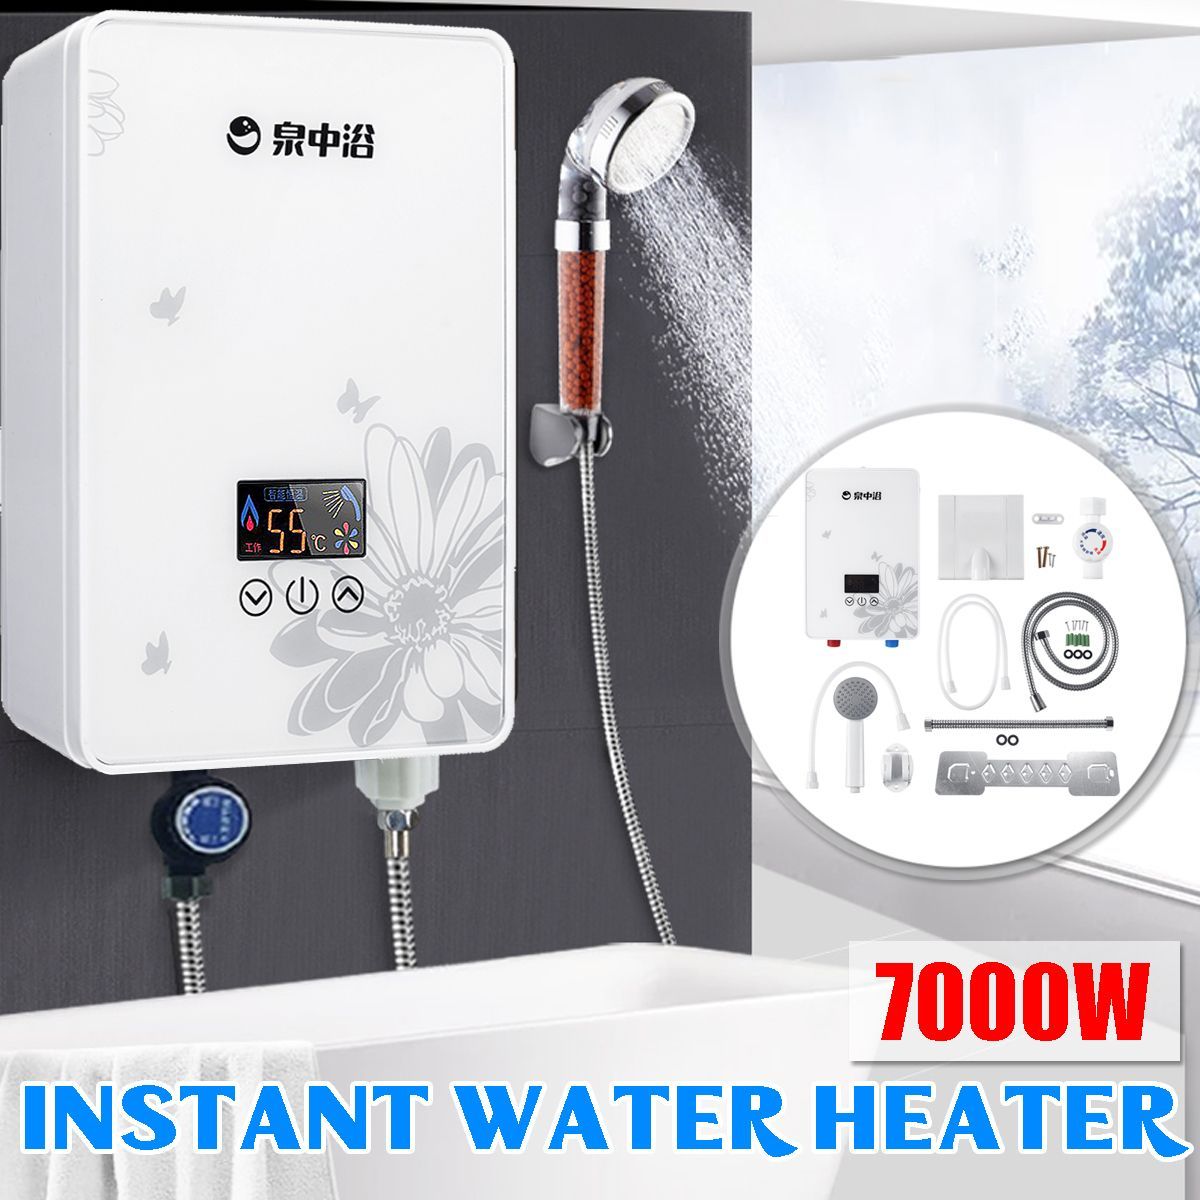 Instant-Hot-7000W-220V-Electric-Hot-Water-Heater-Tankless-Instant-Boiler-Bathroom-Shower-Set-Thermos-1579852